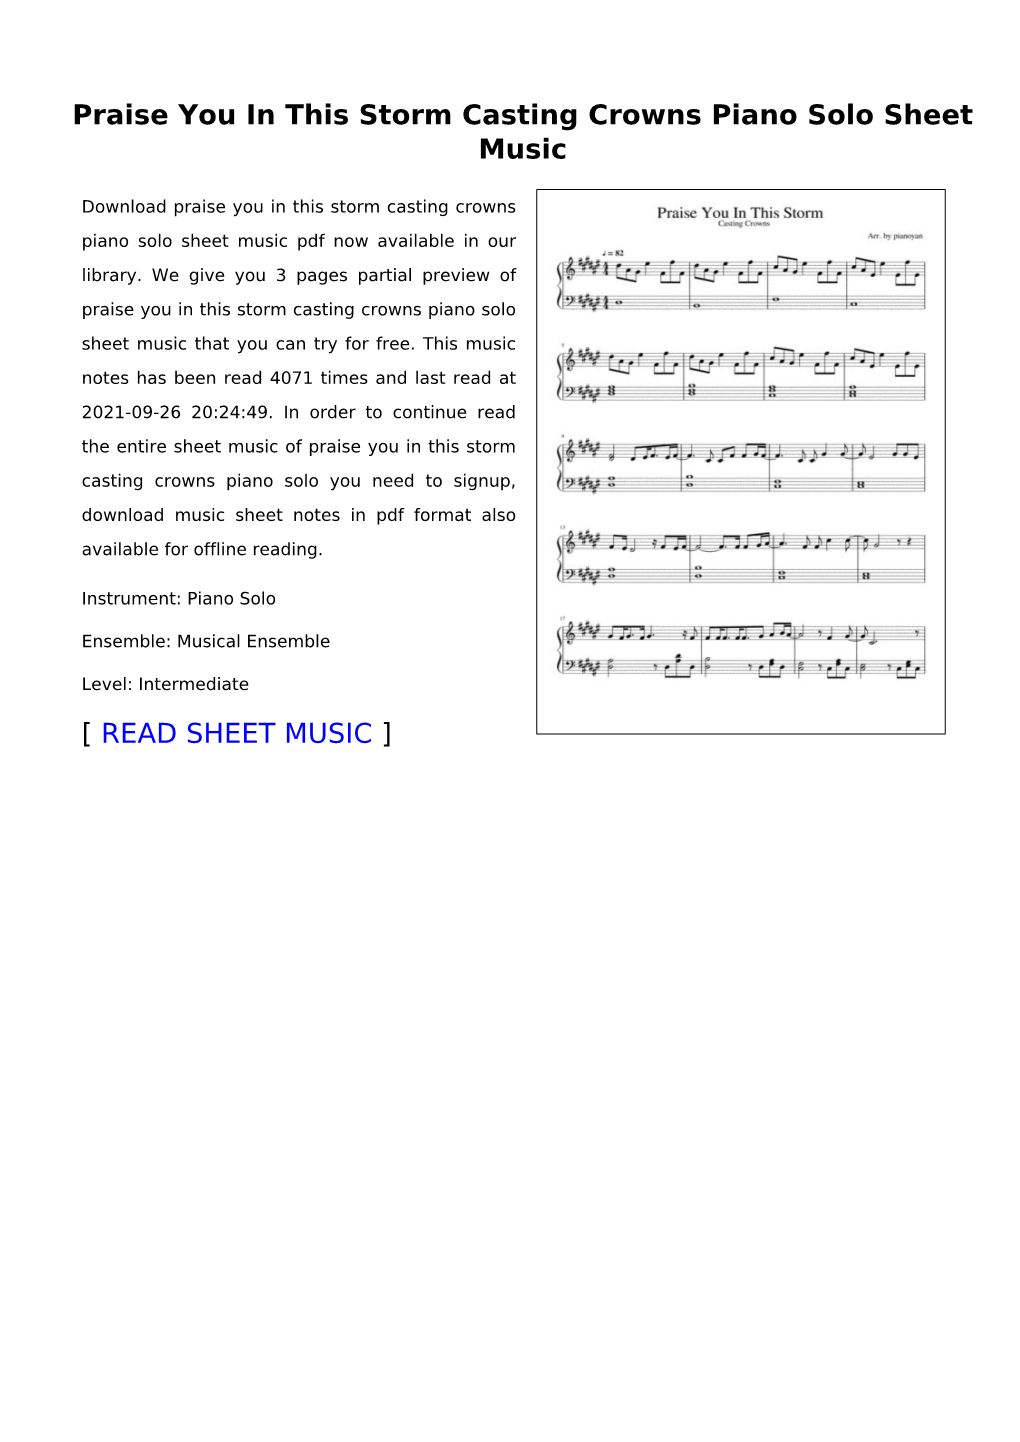 Praise You in This Storm Casting Crowns Piano Solo Sheet Music